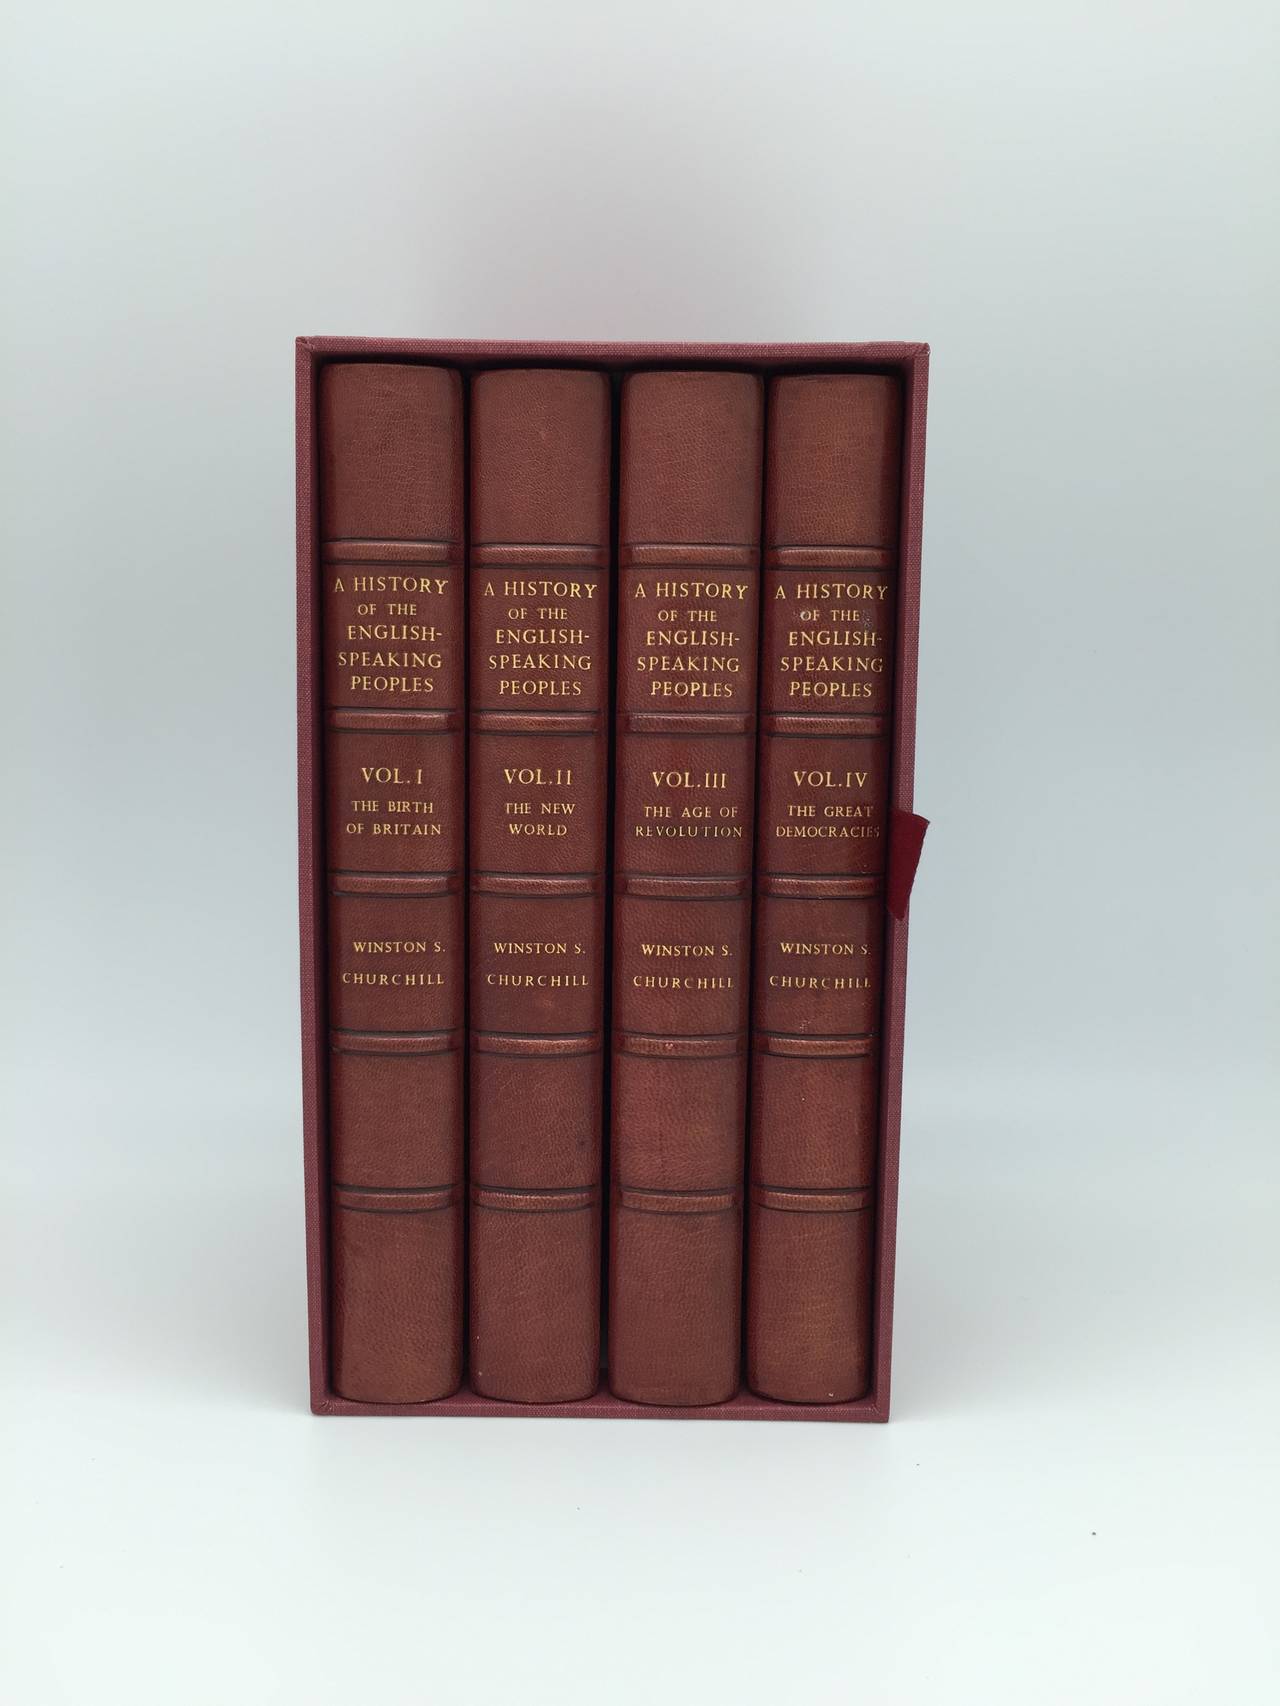 “CHURCHILL’S LAST GREAT WORK”: HISTORY OF THE ENGLISH-SPEAKING PEOPLES - Signed First Edition Set 

Four volumes - volume three signed by Winston Churchill. Octavo, period full red morocco bindings with gilt raised bands, gilt decorated spines and